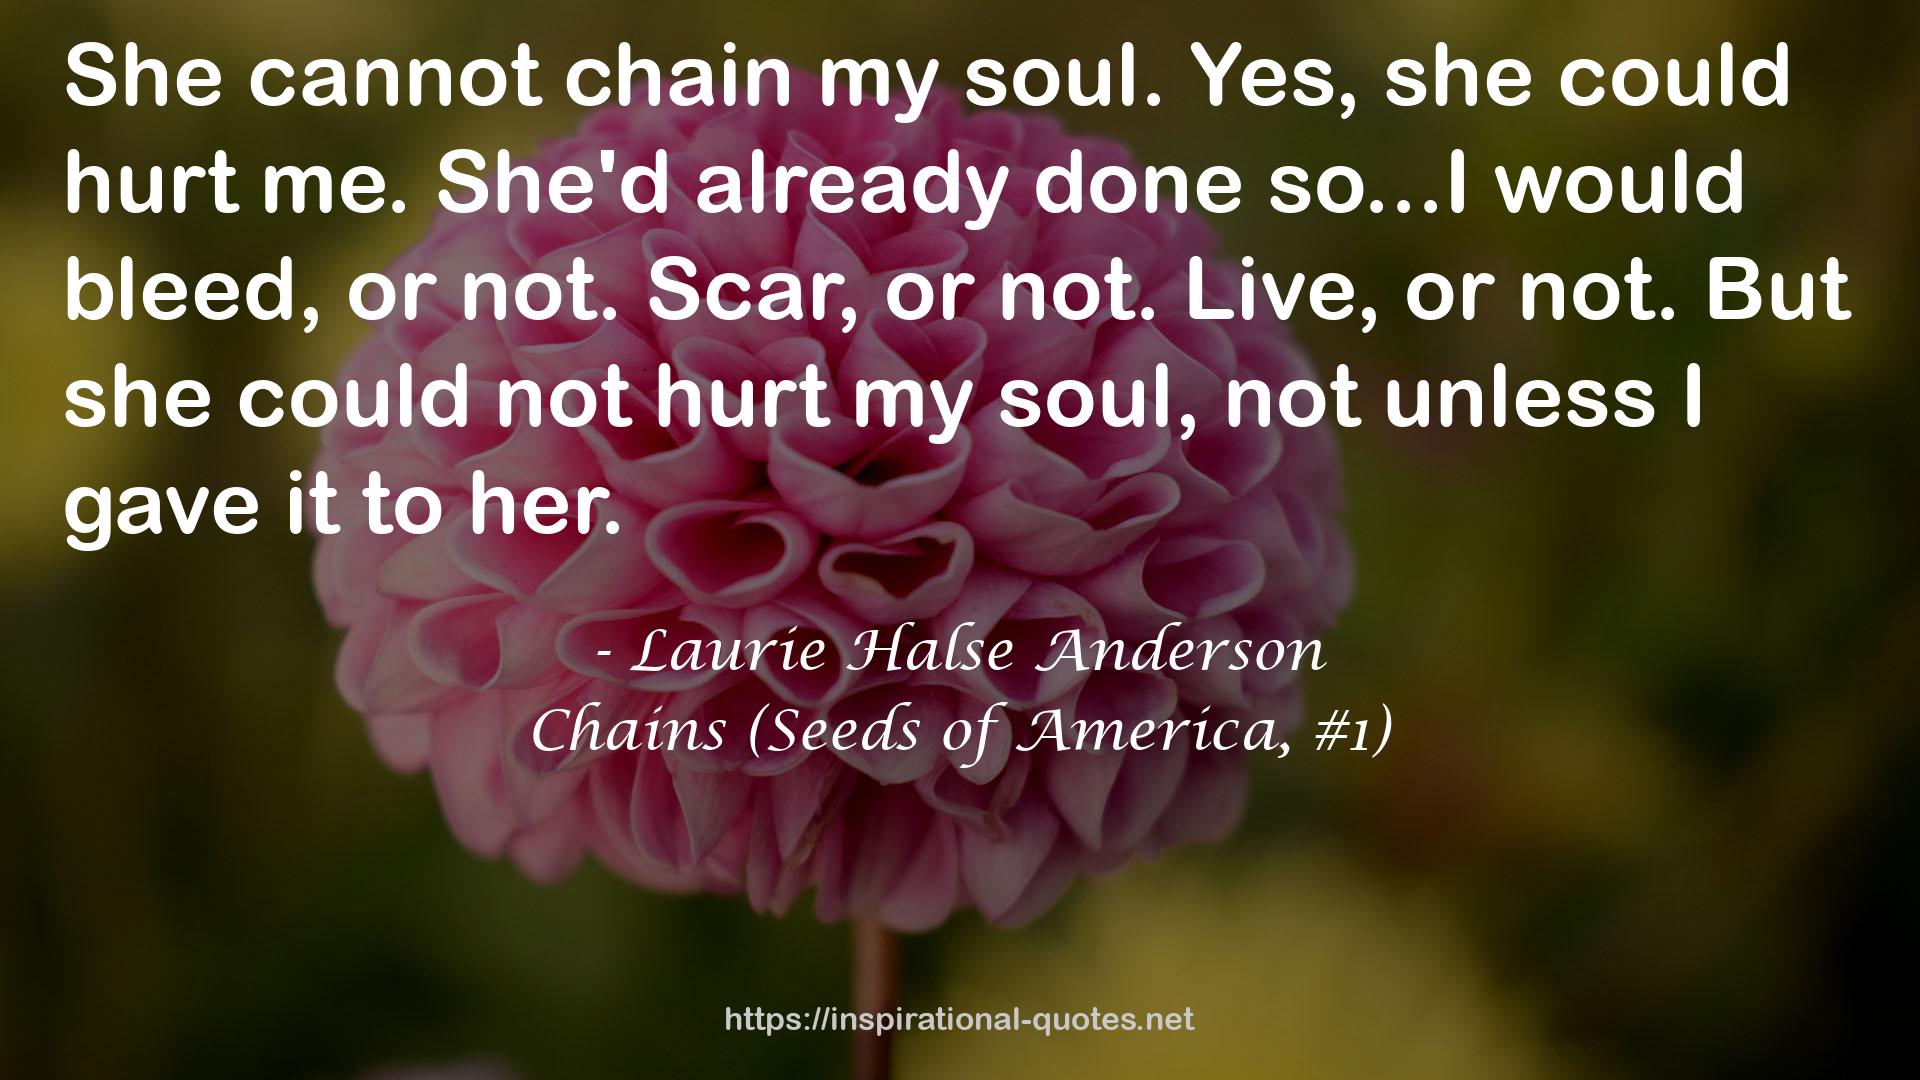 Chains (Seeds of America, #1) QUOTES